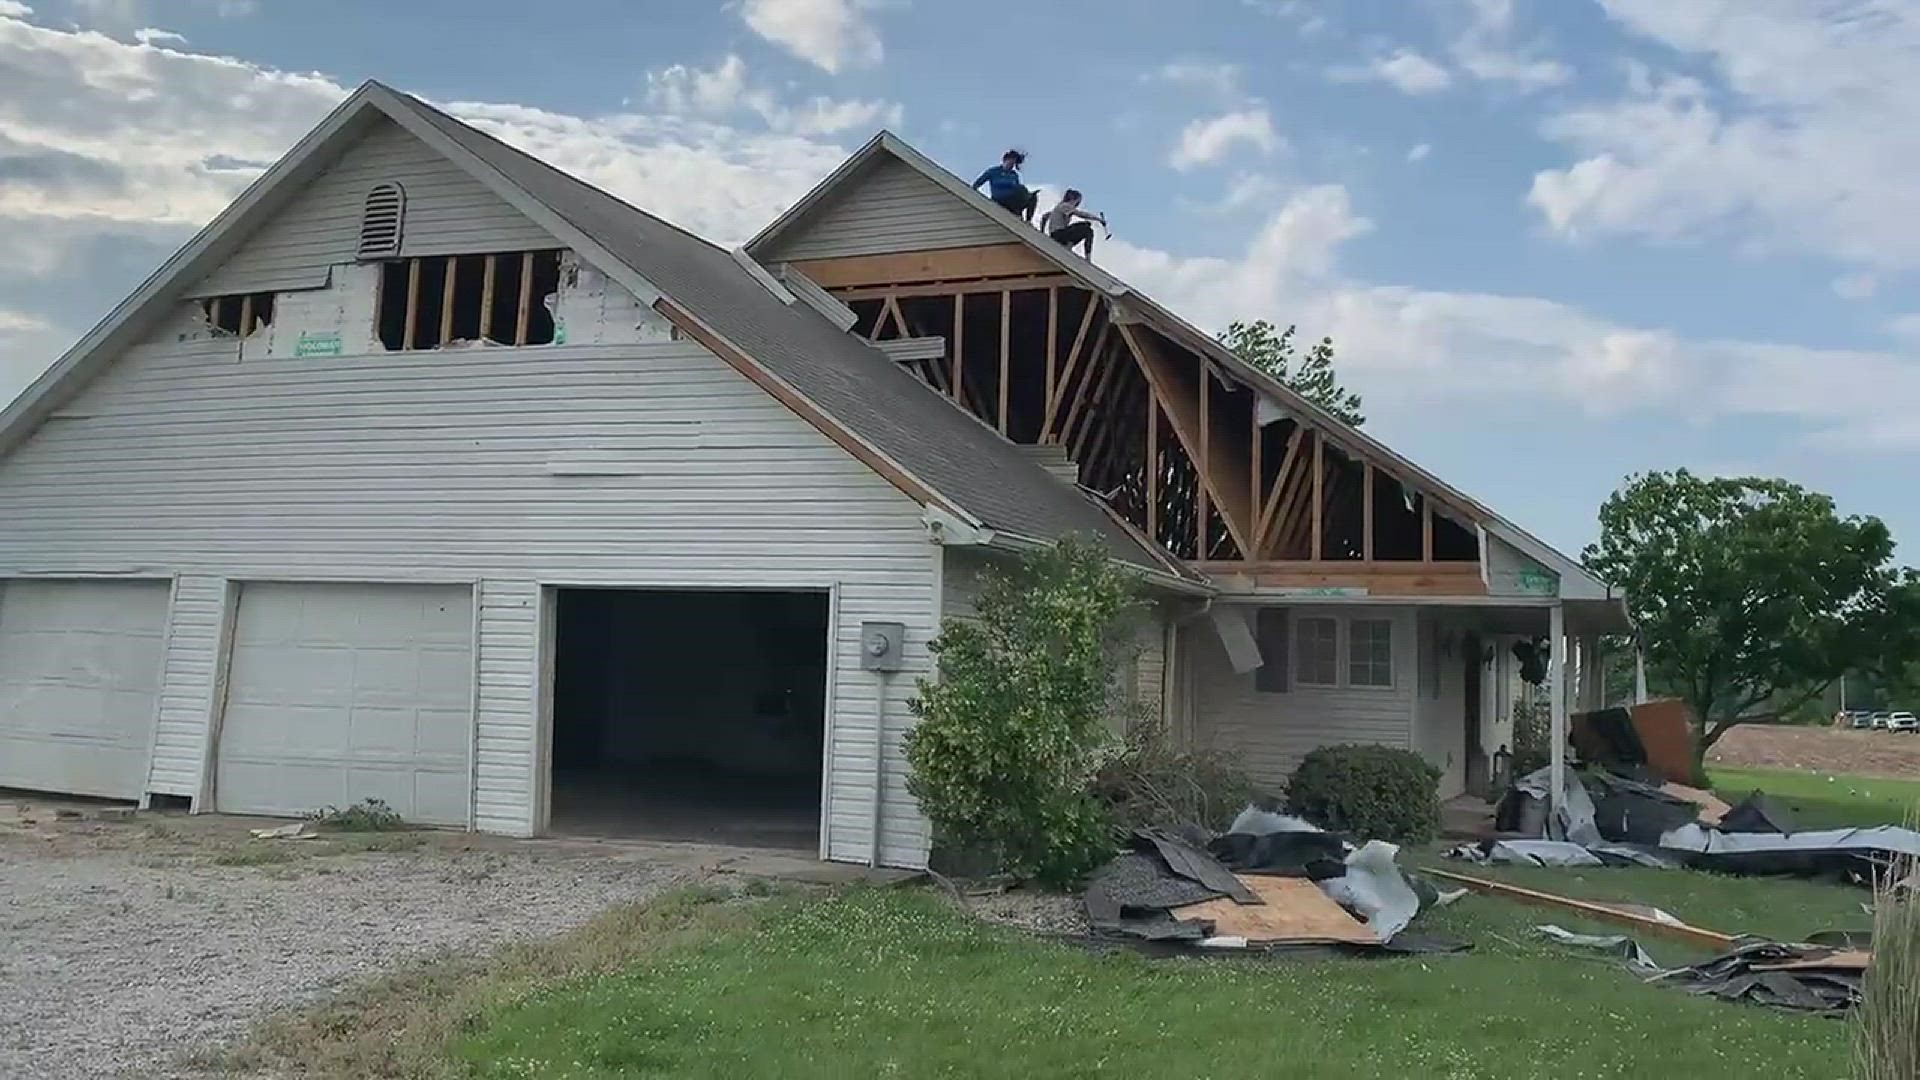 Homes, a fire station and a school in Arlington, Indiana were damaged by a tornado on June 8, 2022.